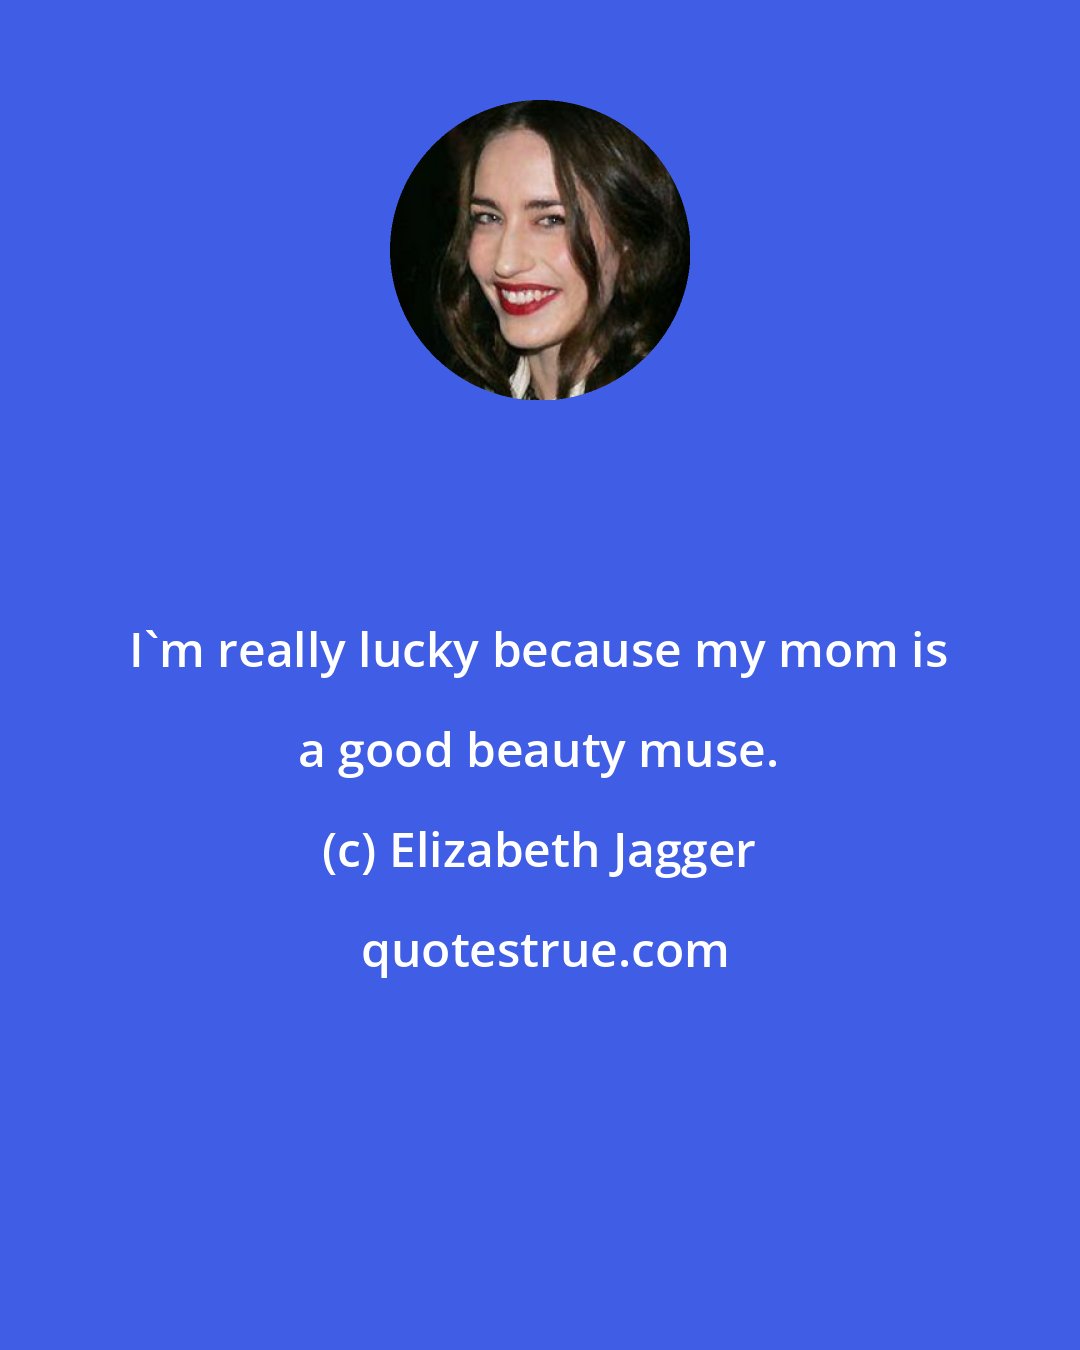 Elizabeth Jagger: I'm really lucky because my mom is a good beauty muse.